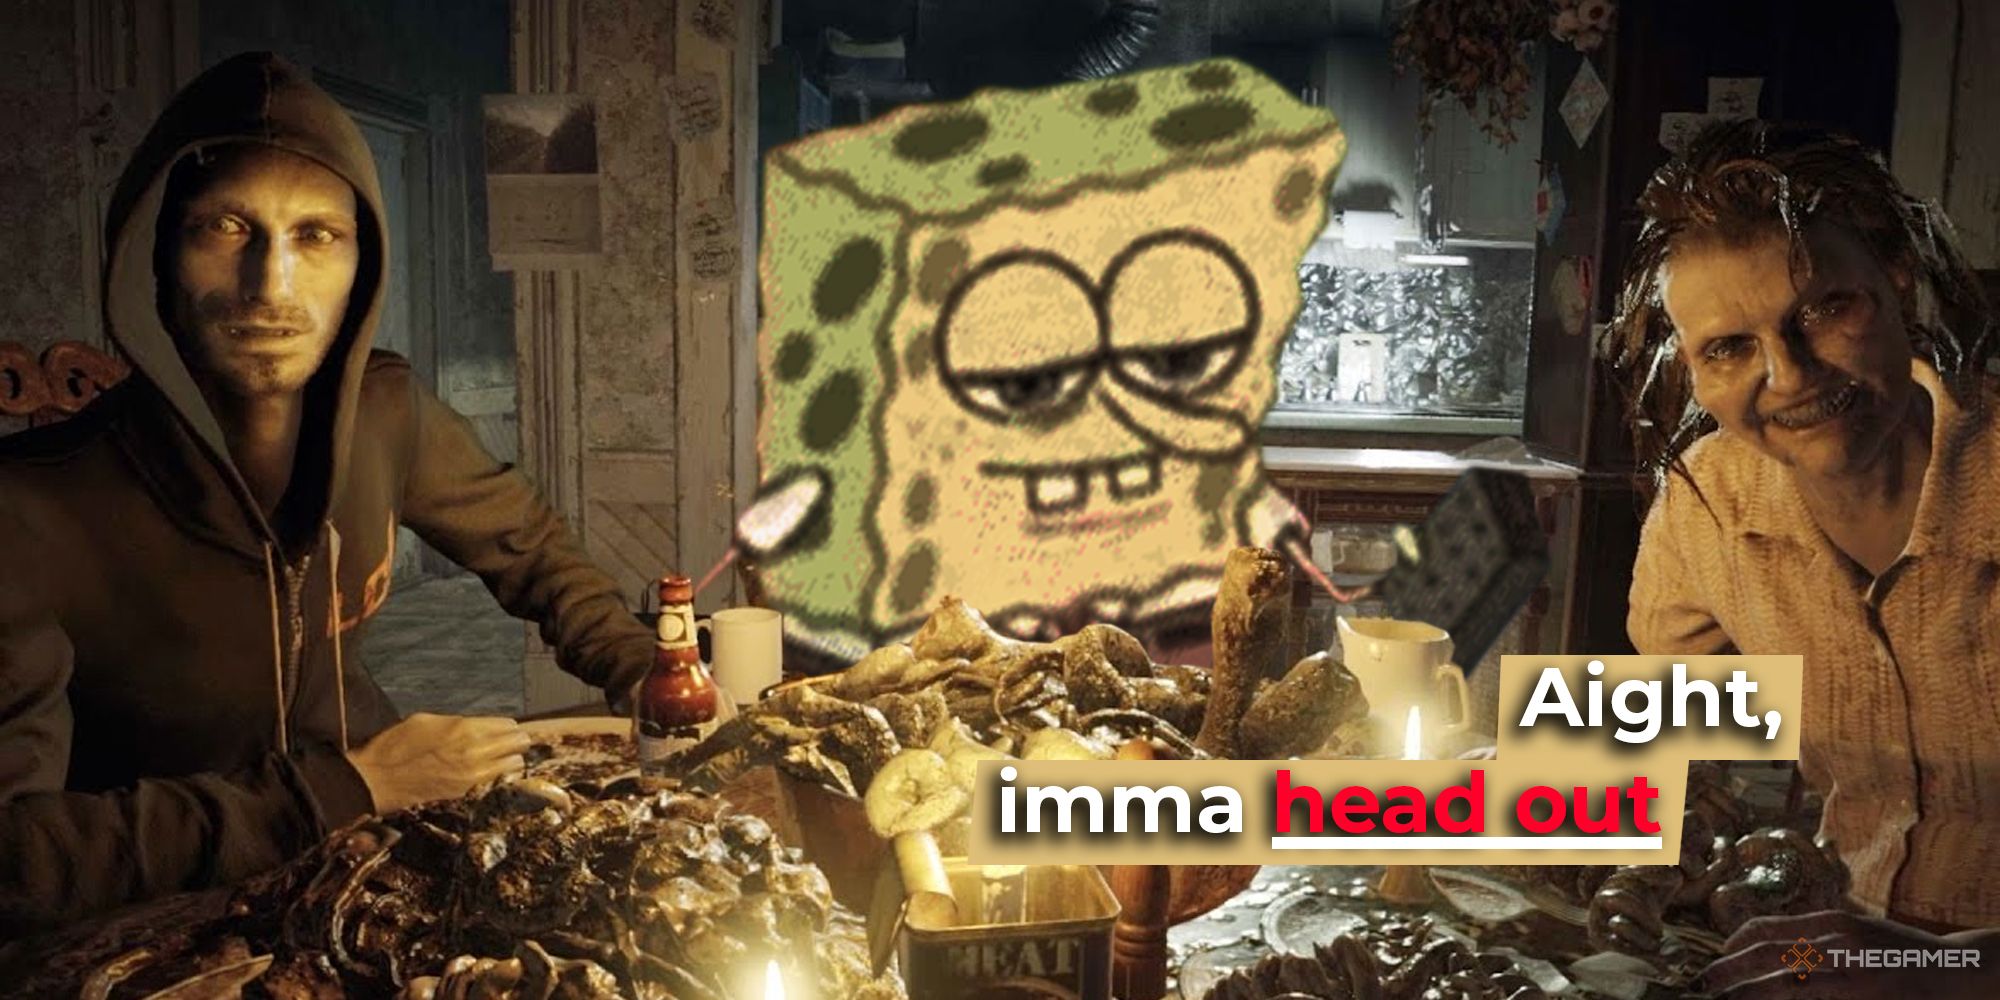 SpongeBob excuses himself from the Baker dinner table after seeing the grotesque feast.